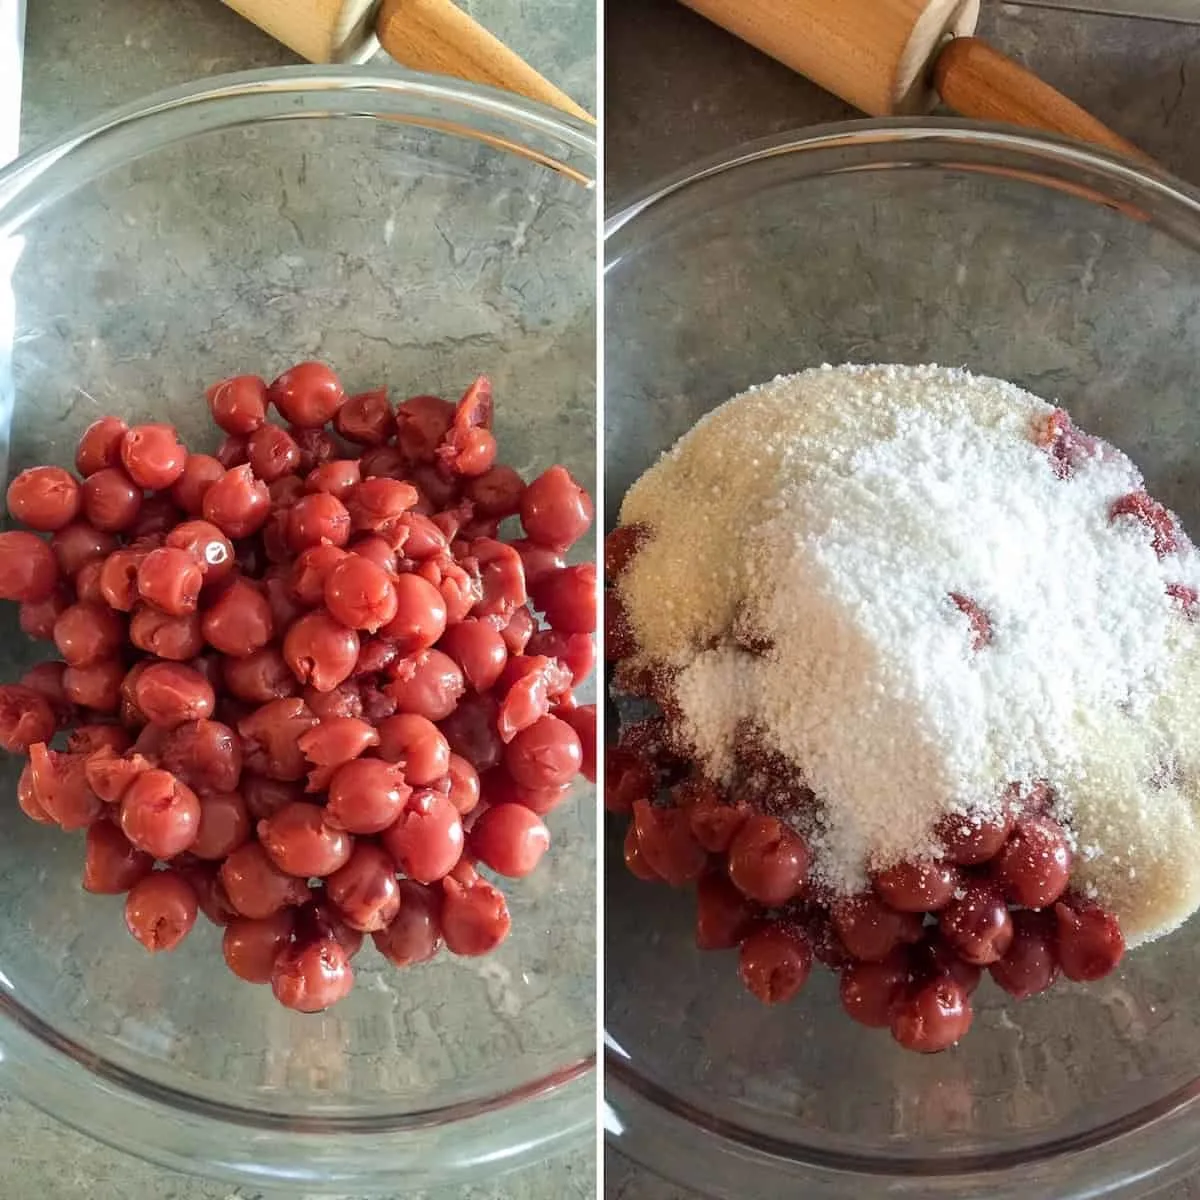 Preparing filling with sugar, tapioca and cherries, two photo collage.